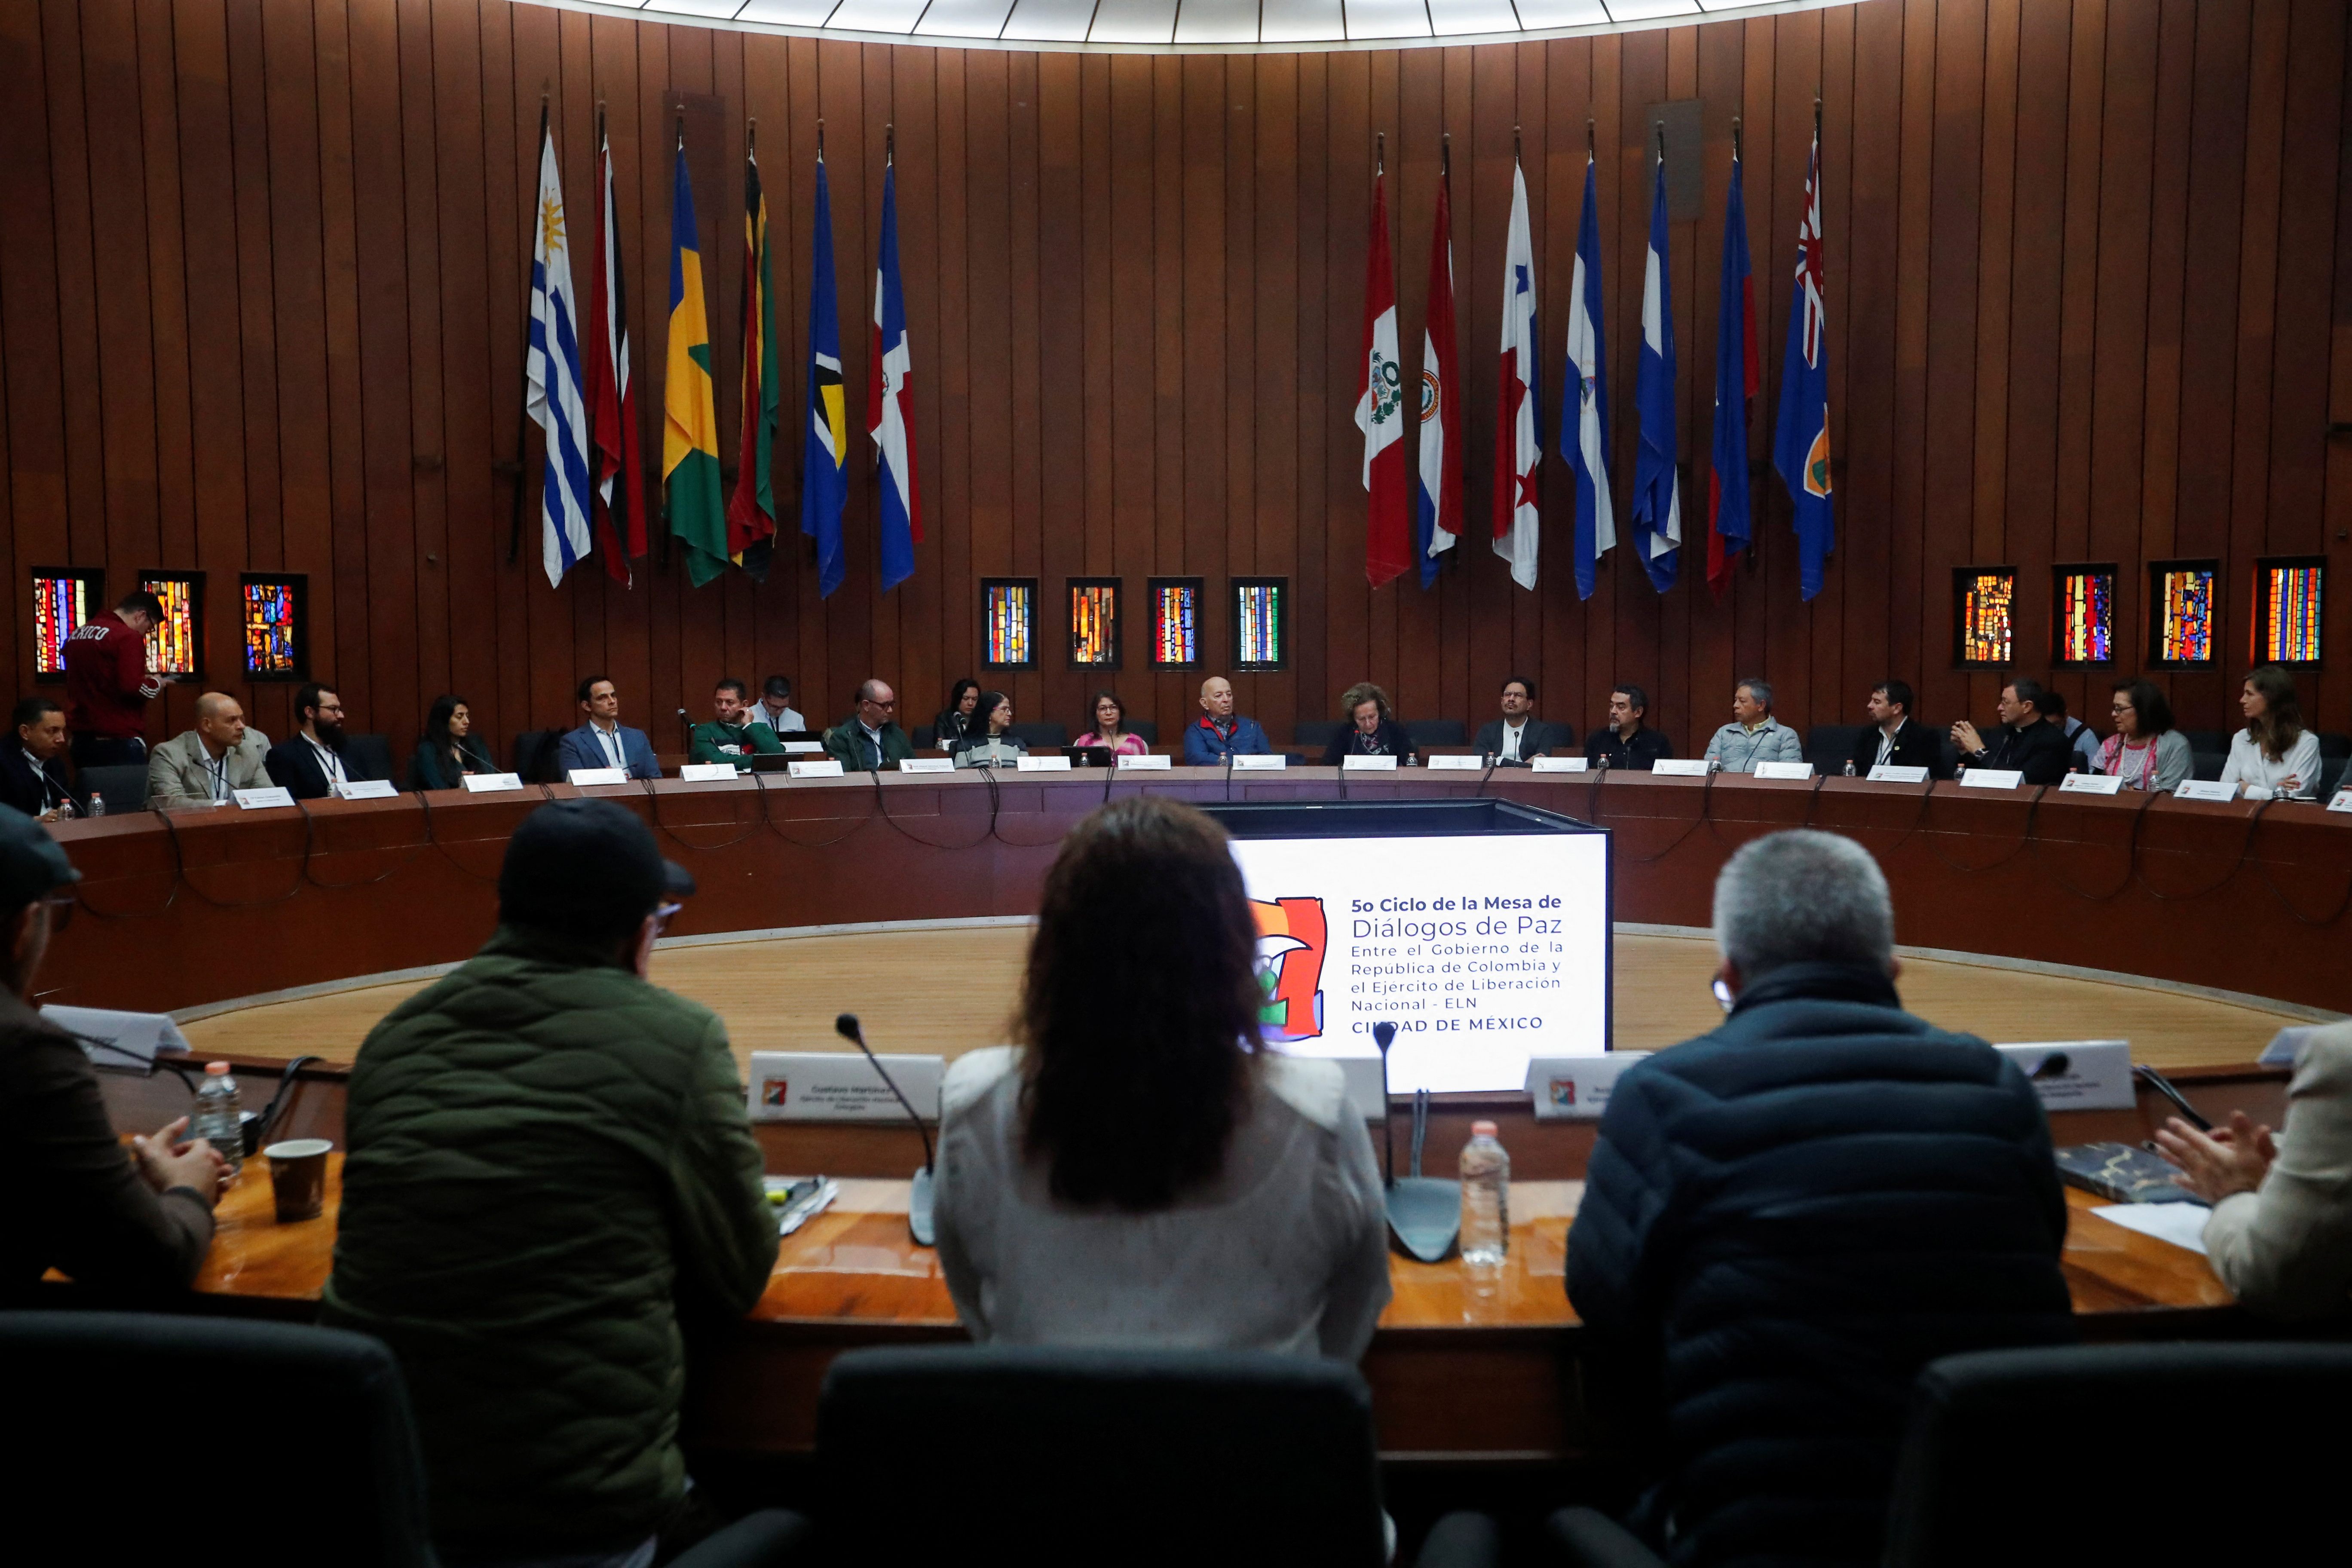 The fifth round of peace dialogues between Colombia's government and the National Liberation Army, in Mexico City